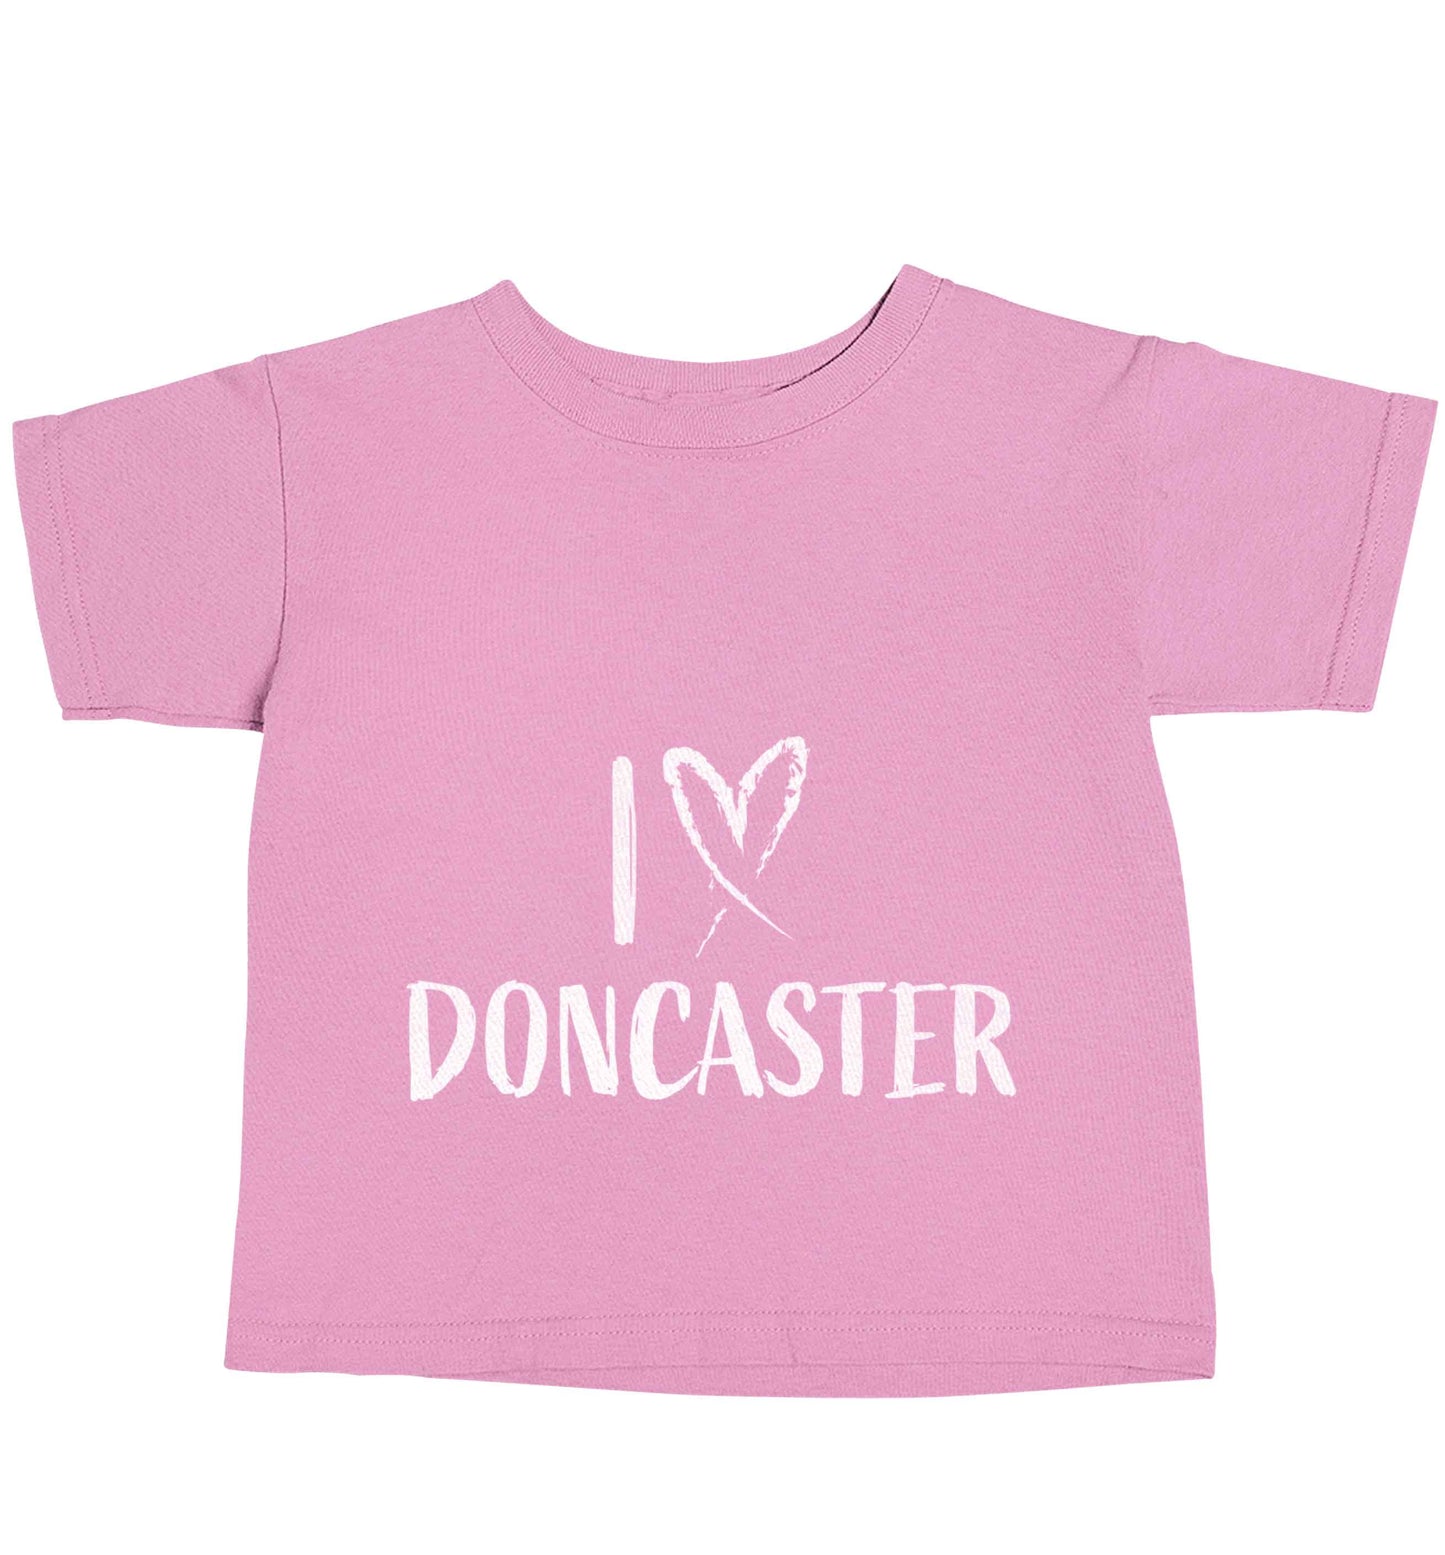 I love Doncaster light pink baby toddler Tshirt 2 Years